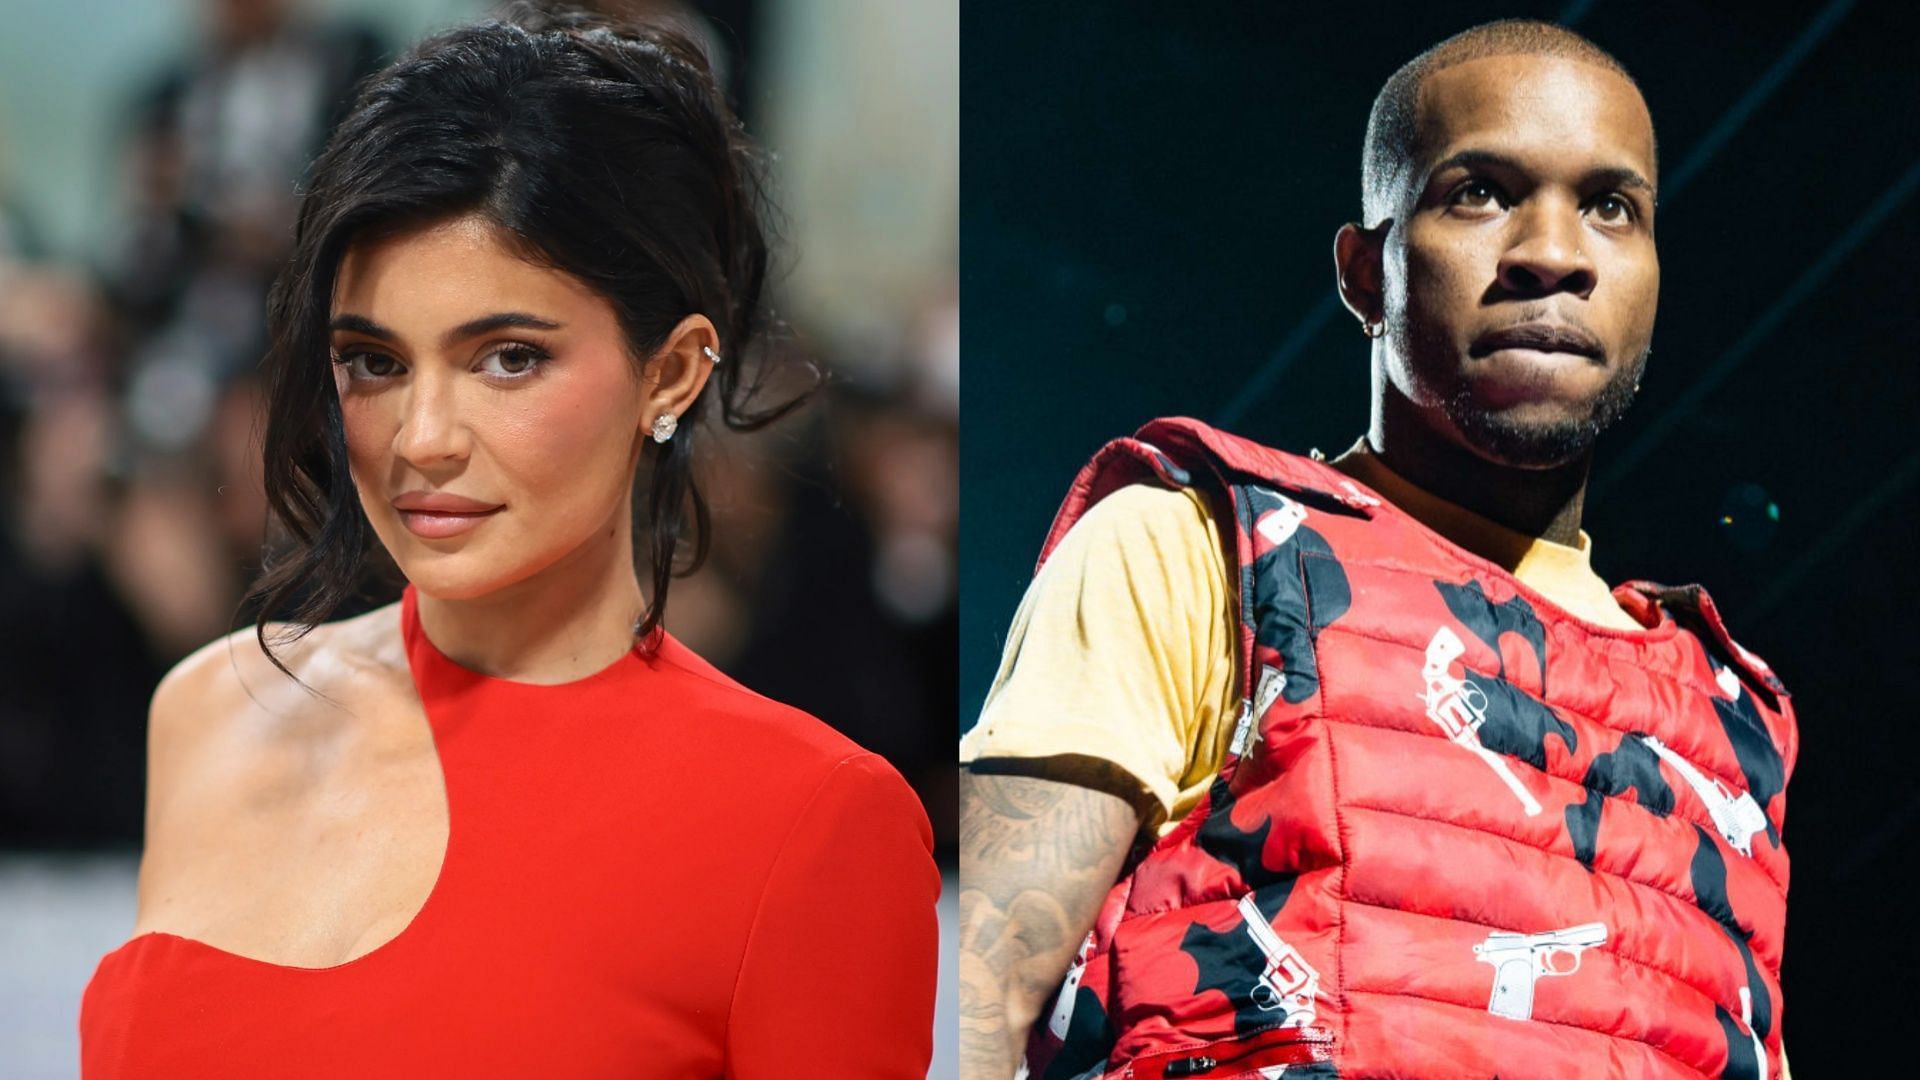 Kylie Jenner and Tory Lanez. (Photos via Getty Images)